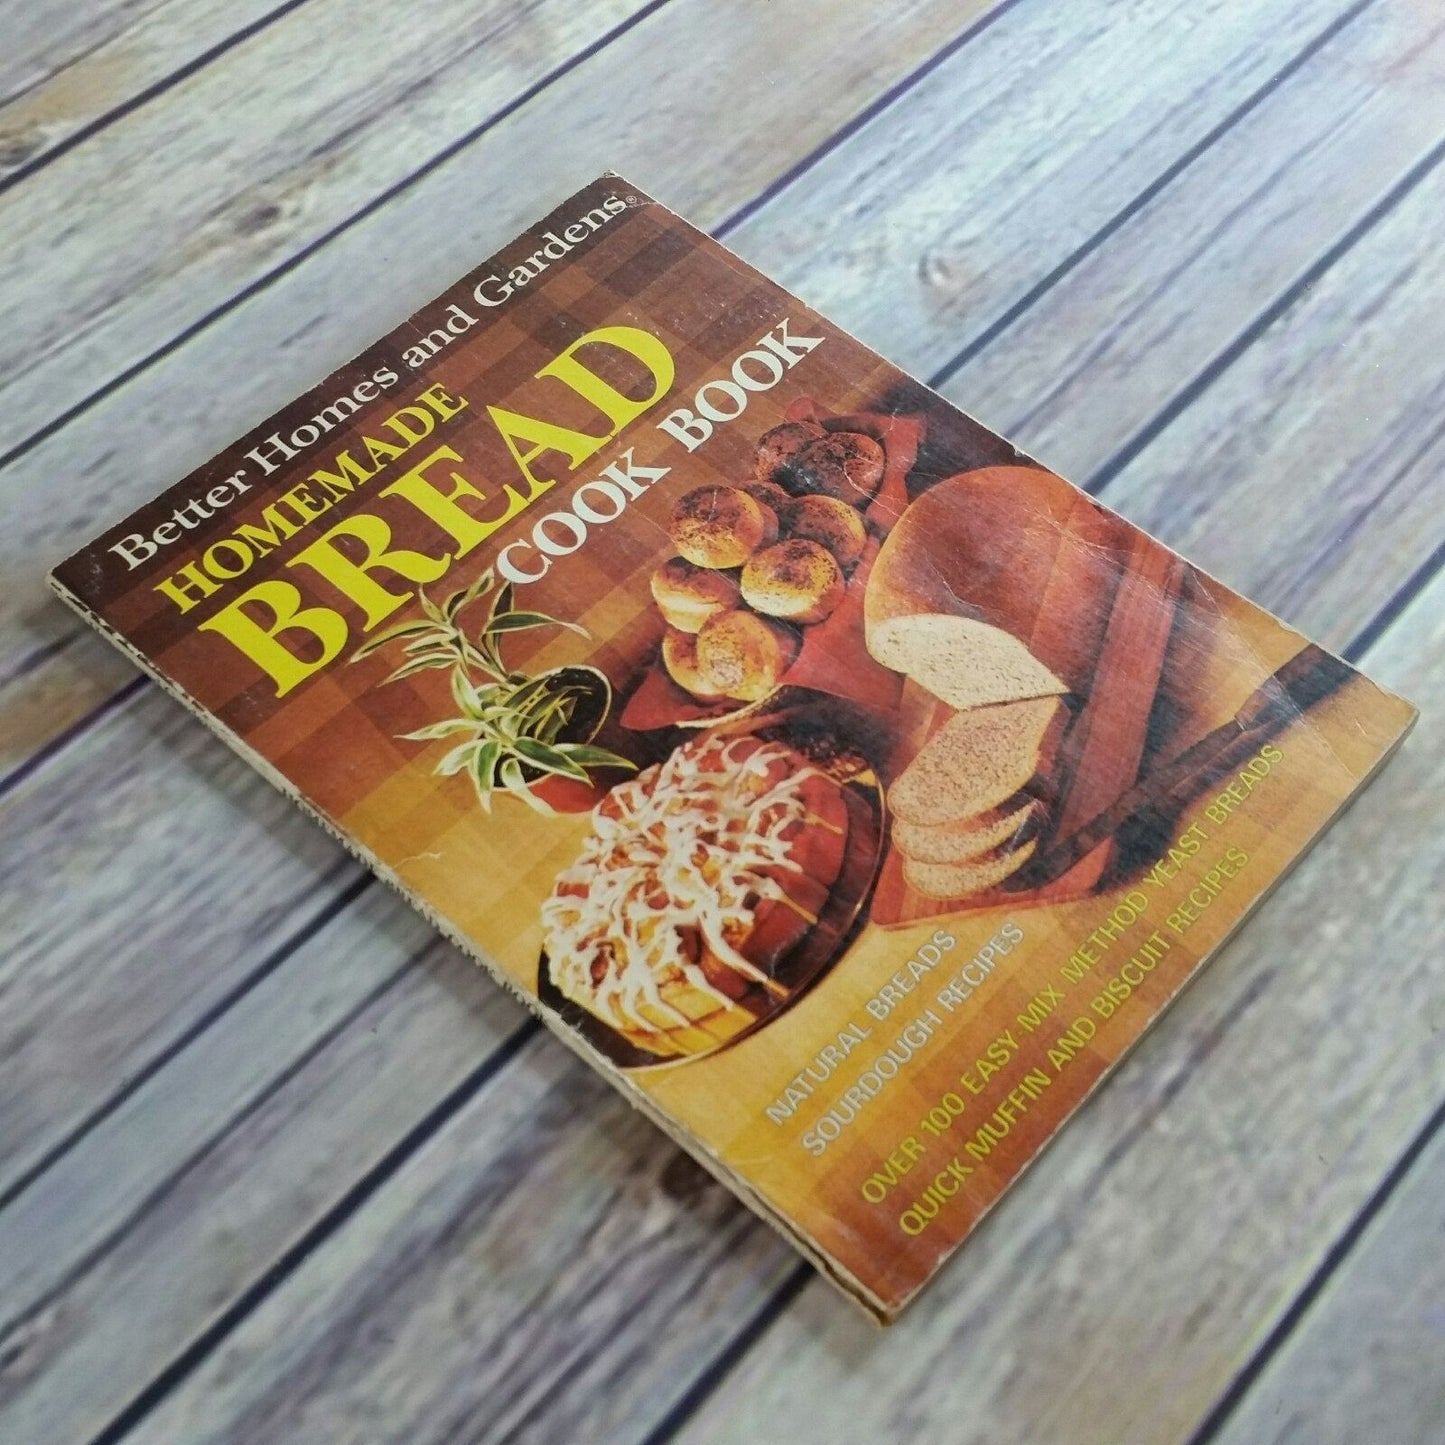 Vintage Cookbook Homemade Breads Recipes Better Home and Gardens 1981 Paperback Bread Recipes Baking Bread yeast Breads Sourdough Natural